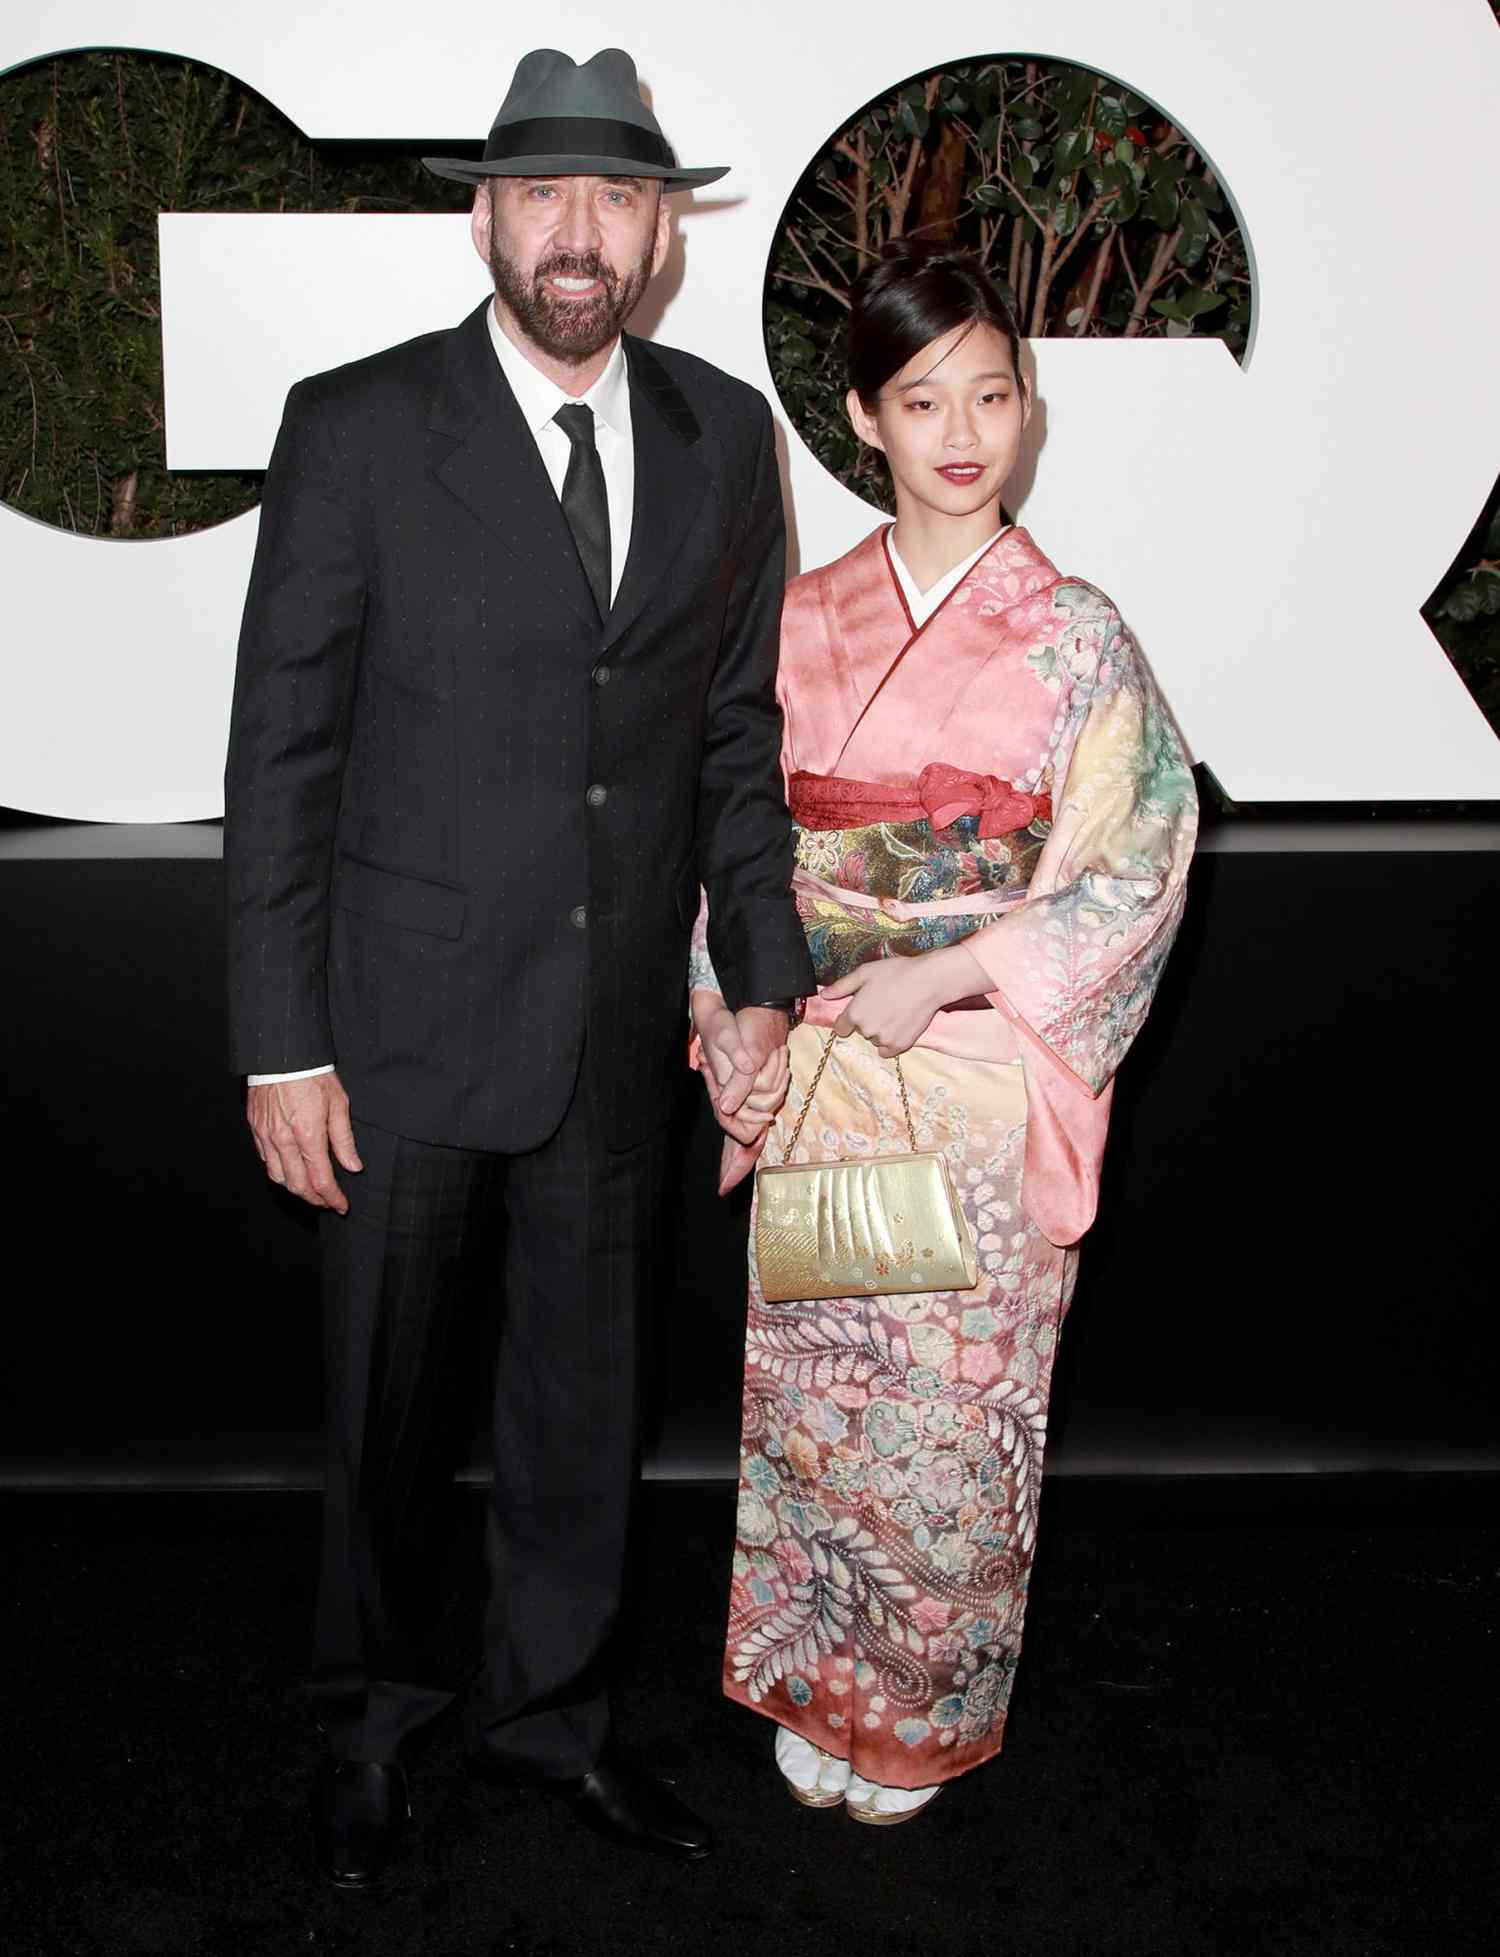 Nicholas Cage and Riko Shibata attend the 2021 GQ Men of the Year Party at the West Hollywood EDITION on November 18, 2021 in West Hollywood, California